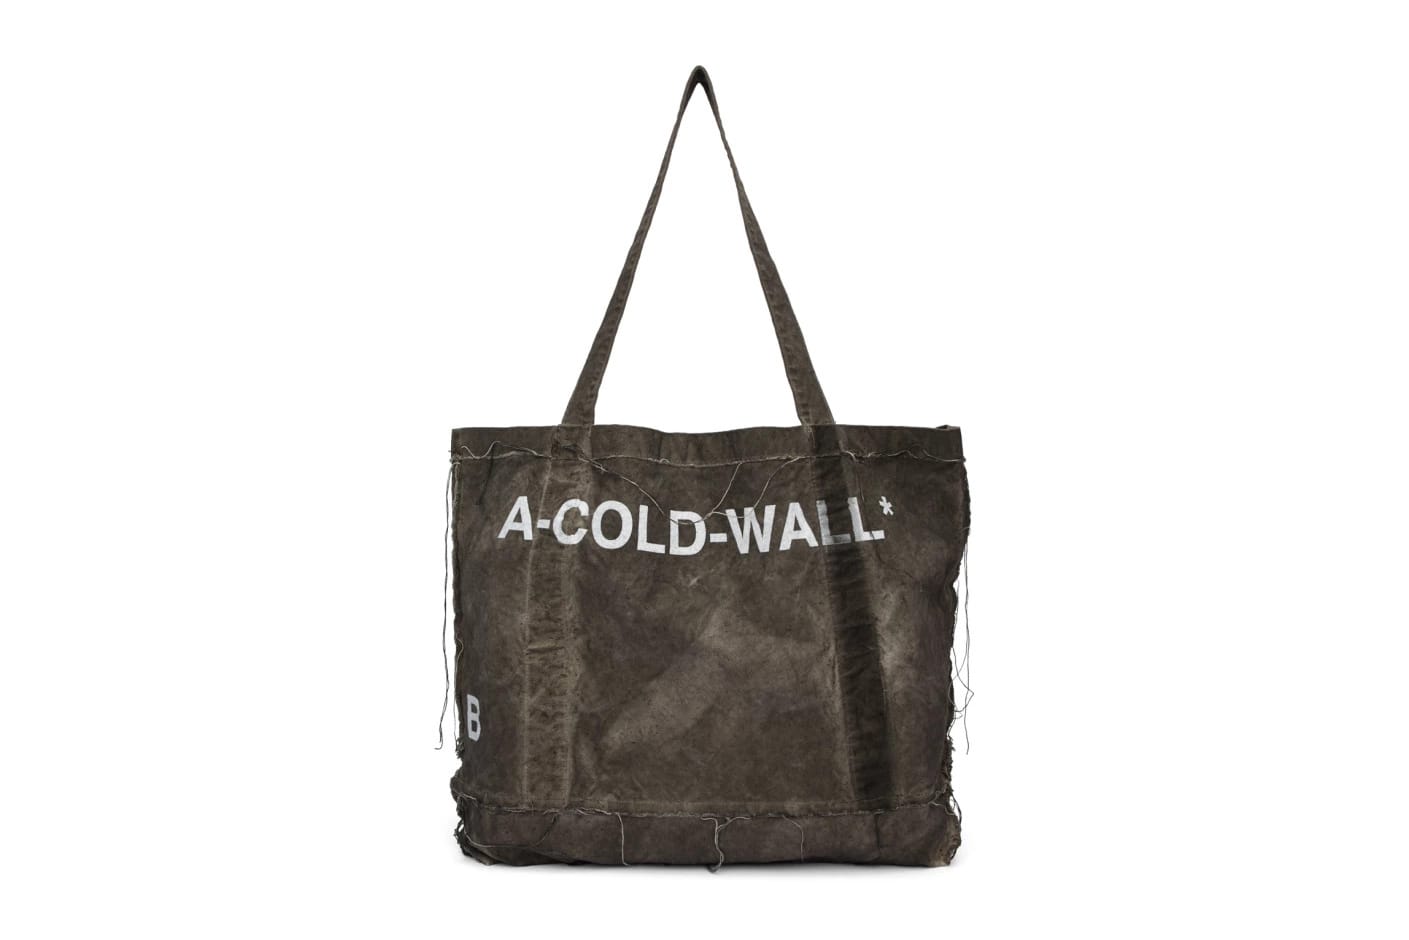 A-COLD-WALL* Black & White Grid Bag NEW